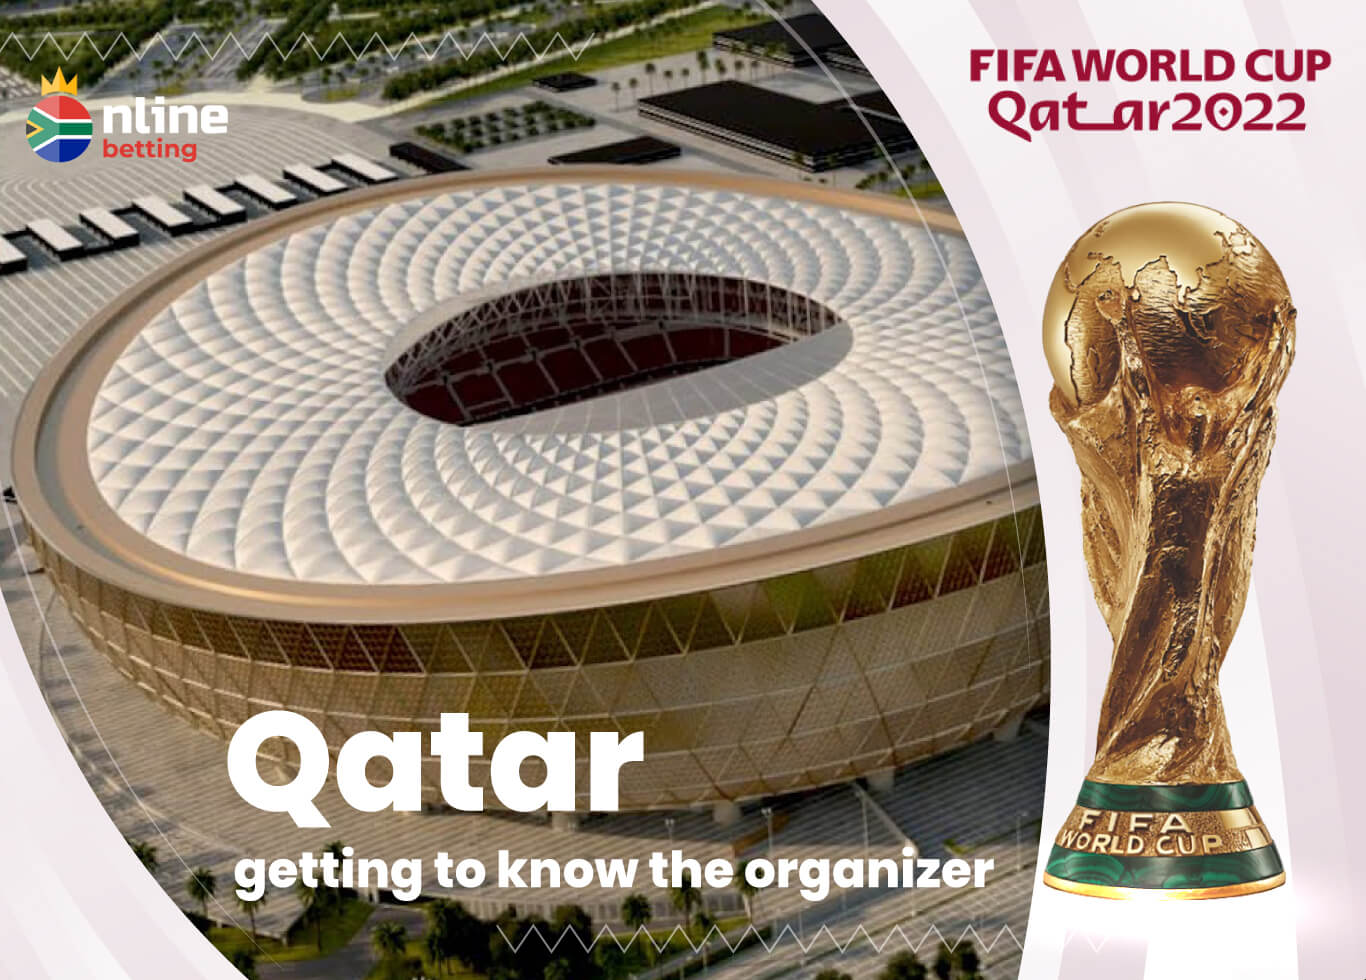 General information about the Host: qatar fifa world cup stadiums and Regulations 